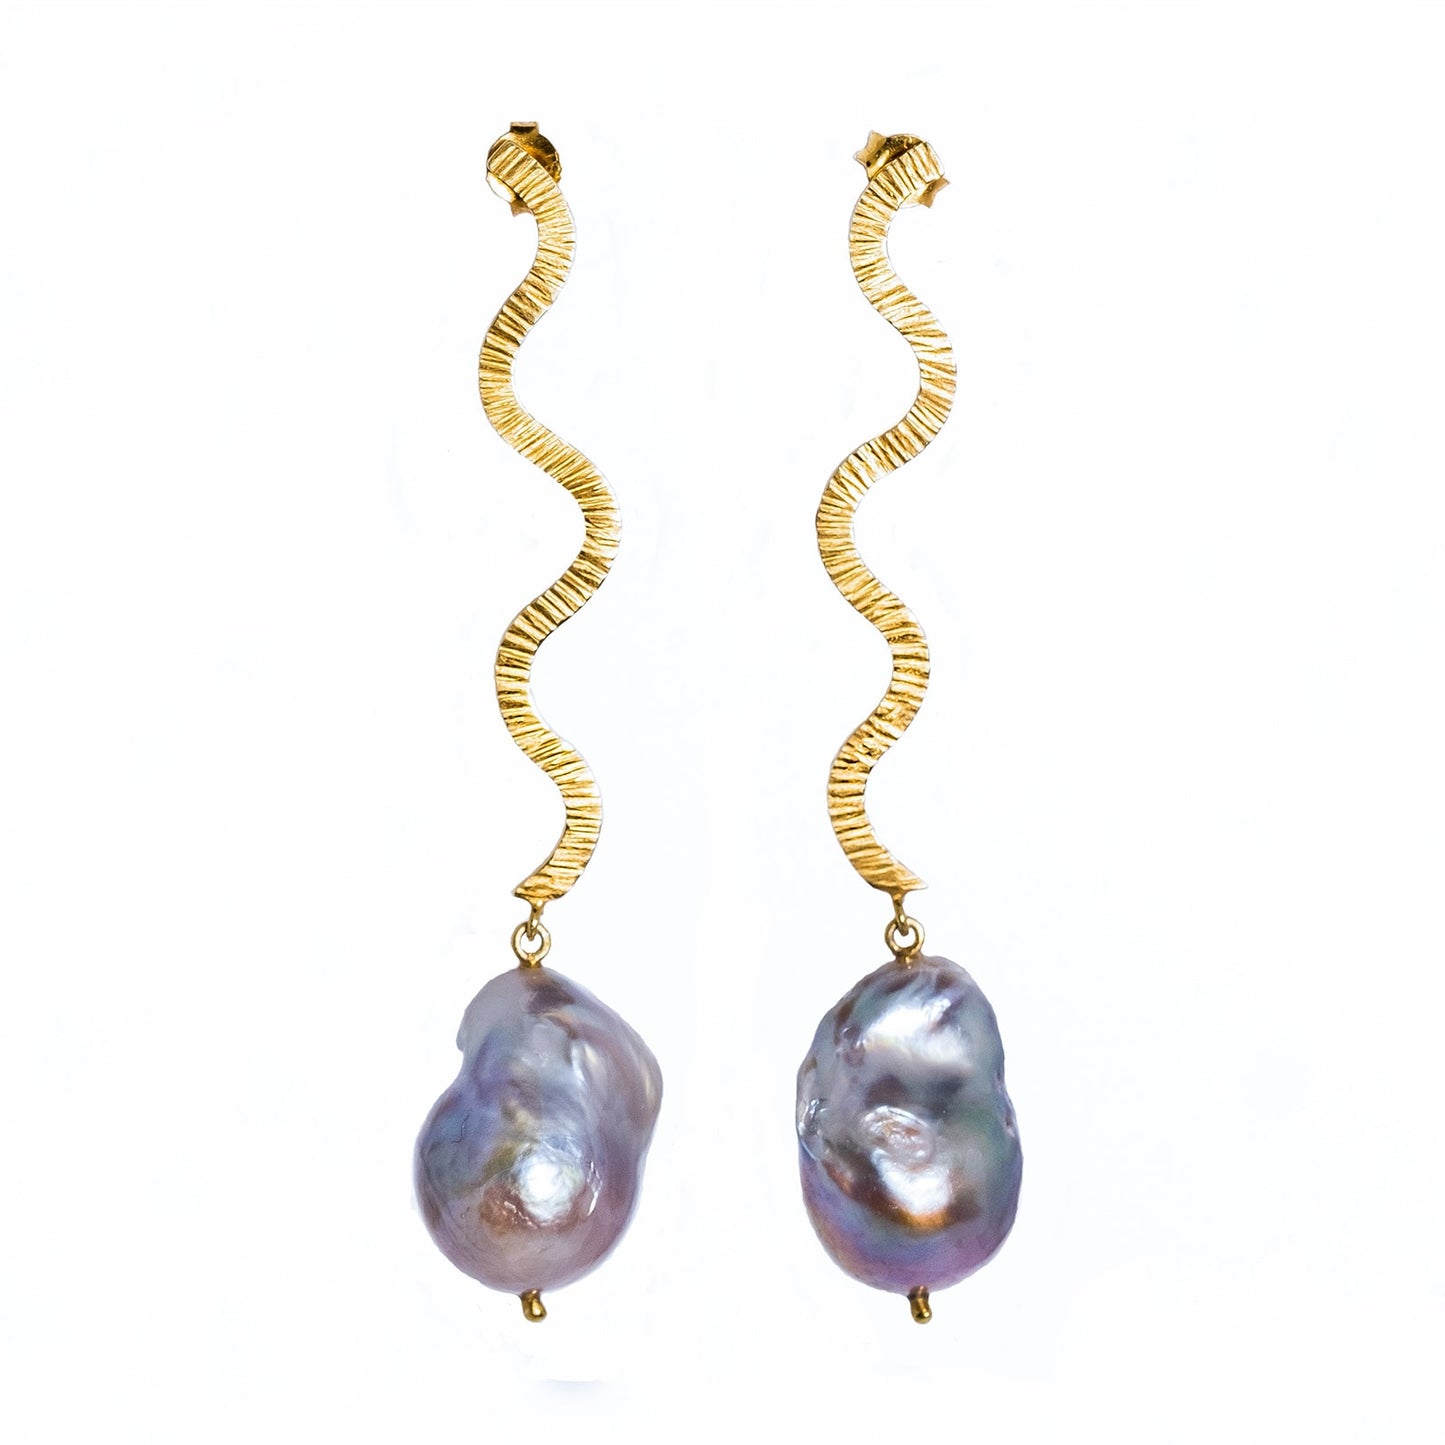 Shape Baroque Big gold plated pearl earrings, front view.